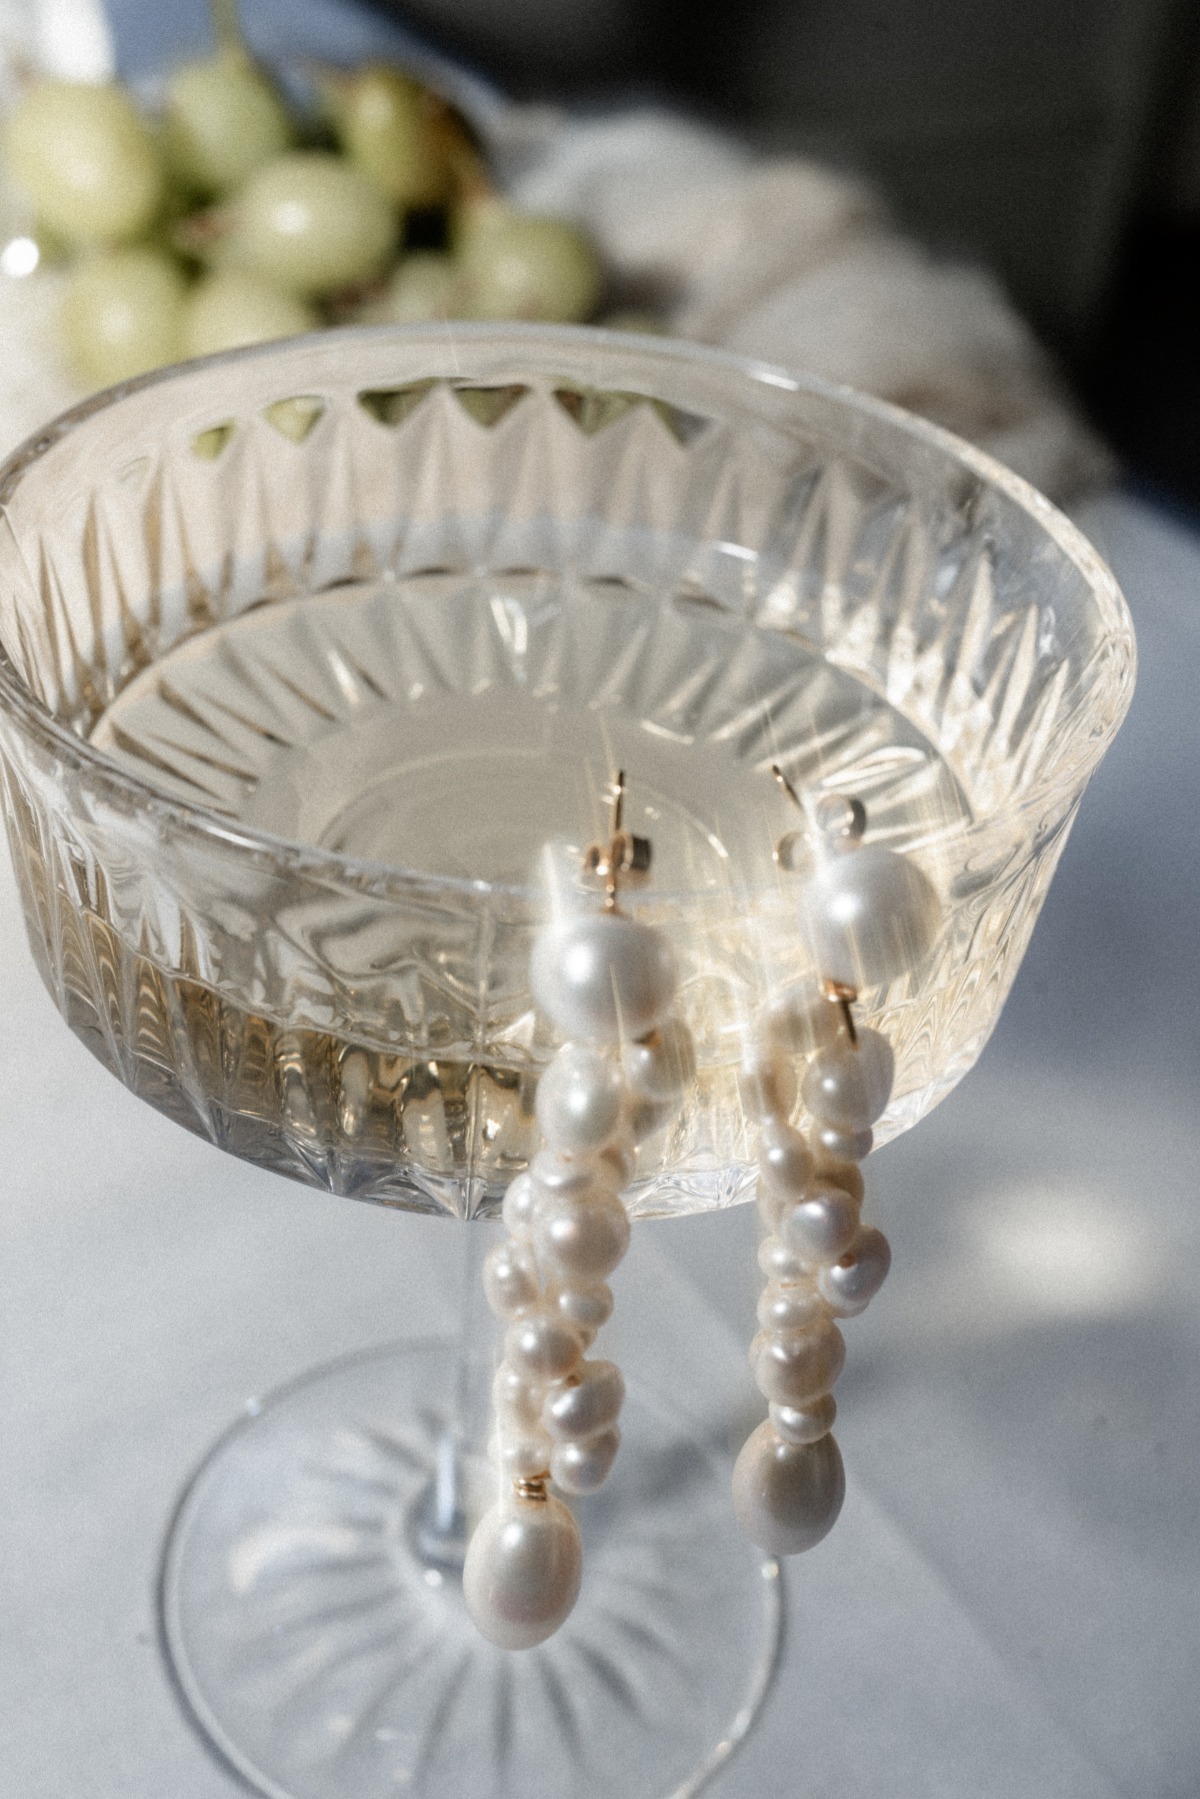 Luxurious pearl earrings resting on champagne goblet 